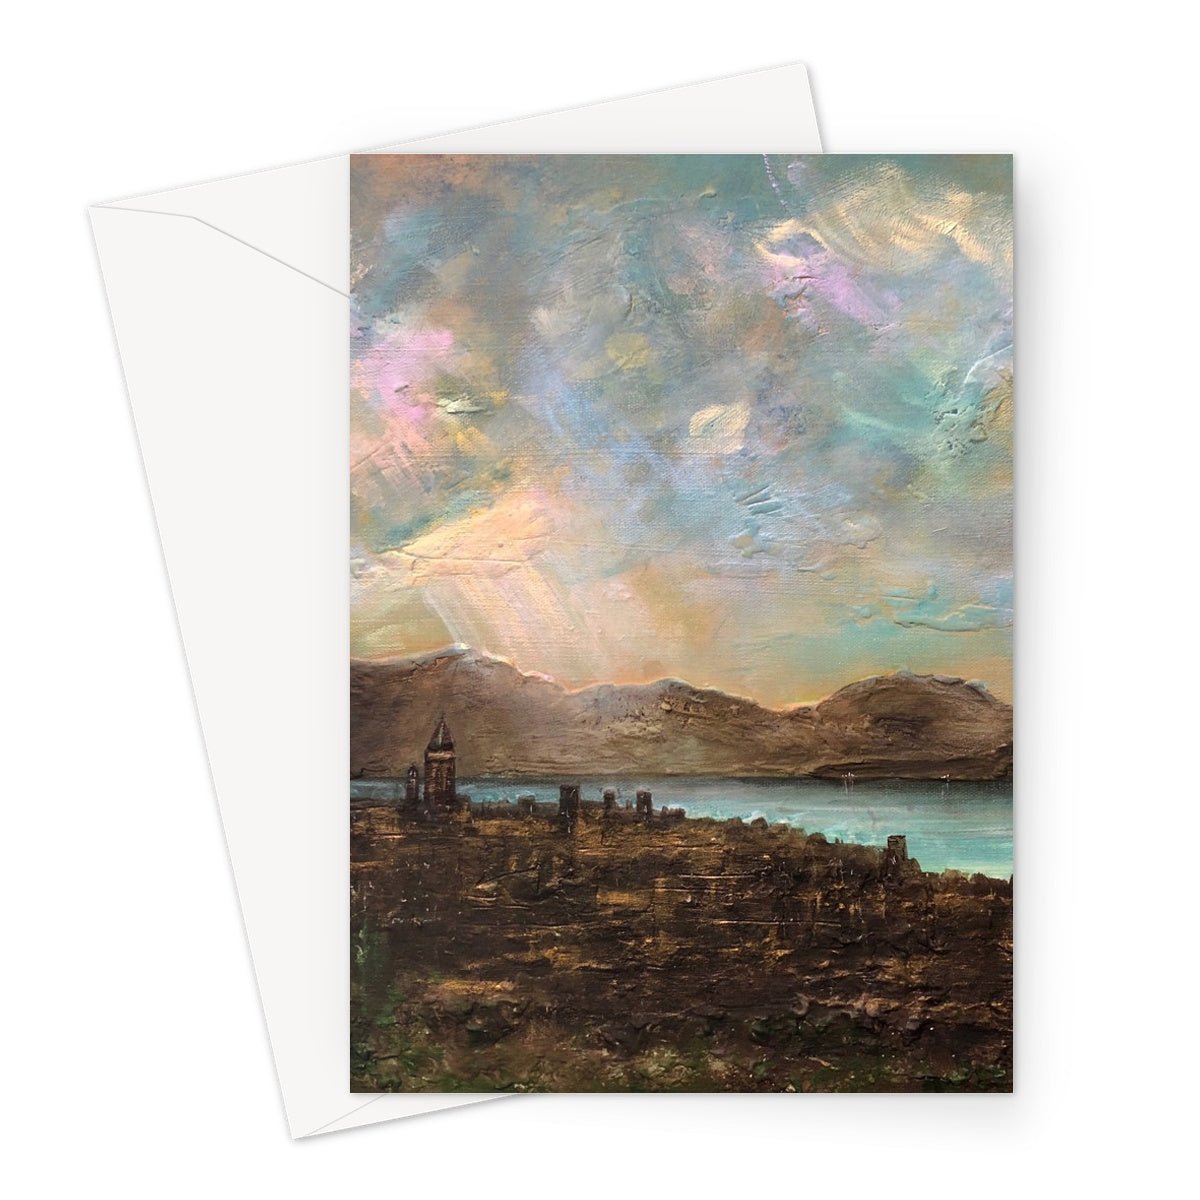 Angels Fingers Over Greenock Art Gifts Greeting Card-Greetings Cards-River Clyde Art Gallery-A5 Portrait-10 Cards-Paintings, Prints, Homeware, Art Gifts From Scotland By Scottish Artist Kevin Hunter